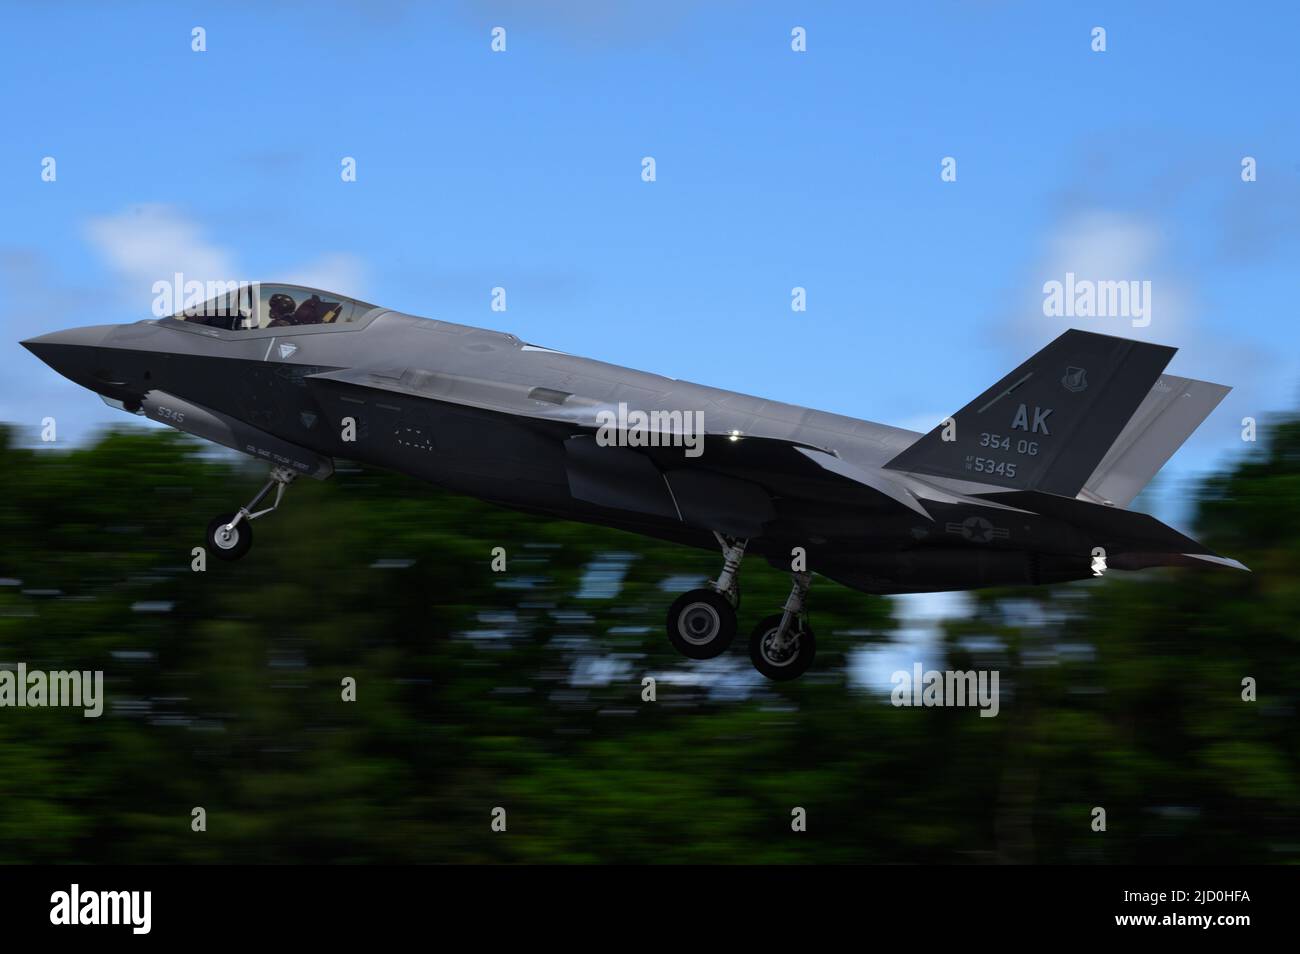 A U.S. F-35A Lightning II assigned to the 356th Expeditionary Fighter Squadron, 354th Air Expeditionary Wing takes off from Palau International Airport in support of Valiant Shield 22, June 12, 2022. VS22 is a U.S.-only, biennial field training exercise focused on integration of joint training in a multi-domain environment. This training builds real-world proficiency in sustaining joint forces through detecting, locating, tracking and engaging units at sea, in the air, on land and in cyberspace in response to a range of mission areas. (U.S. Air Force photo by Senior Airman Jose Miguel T. Tamon Stock Photo